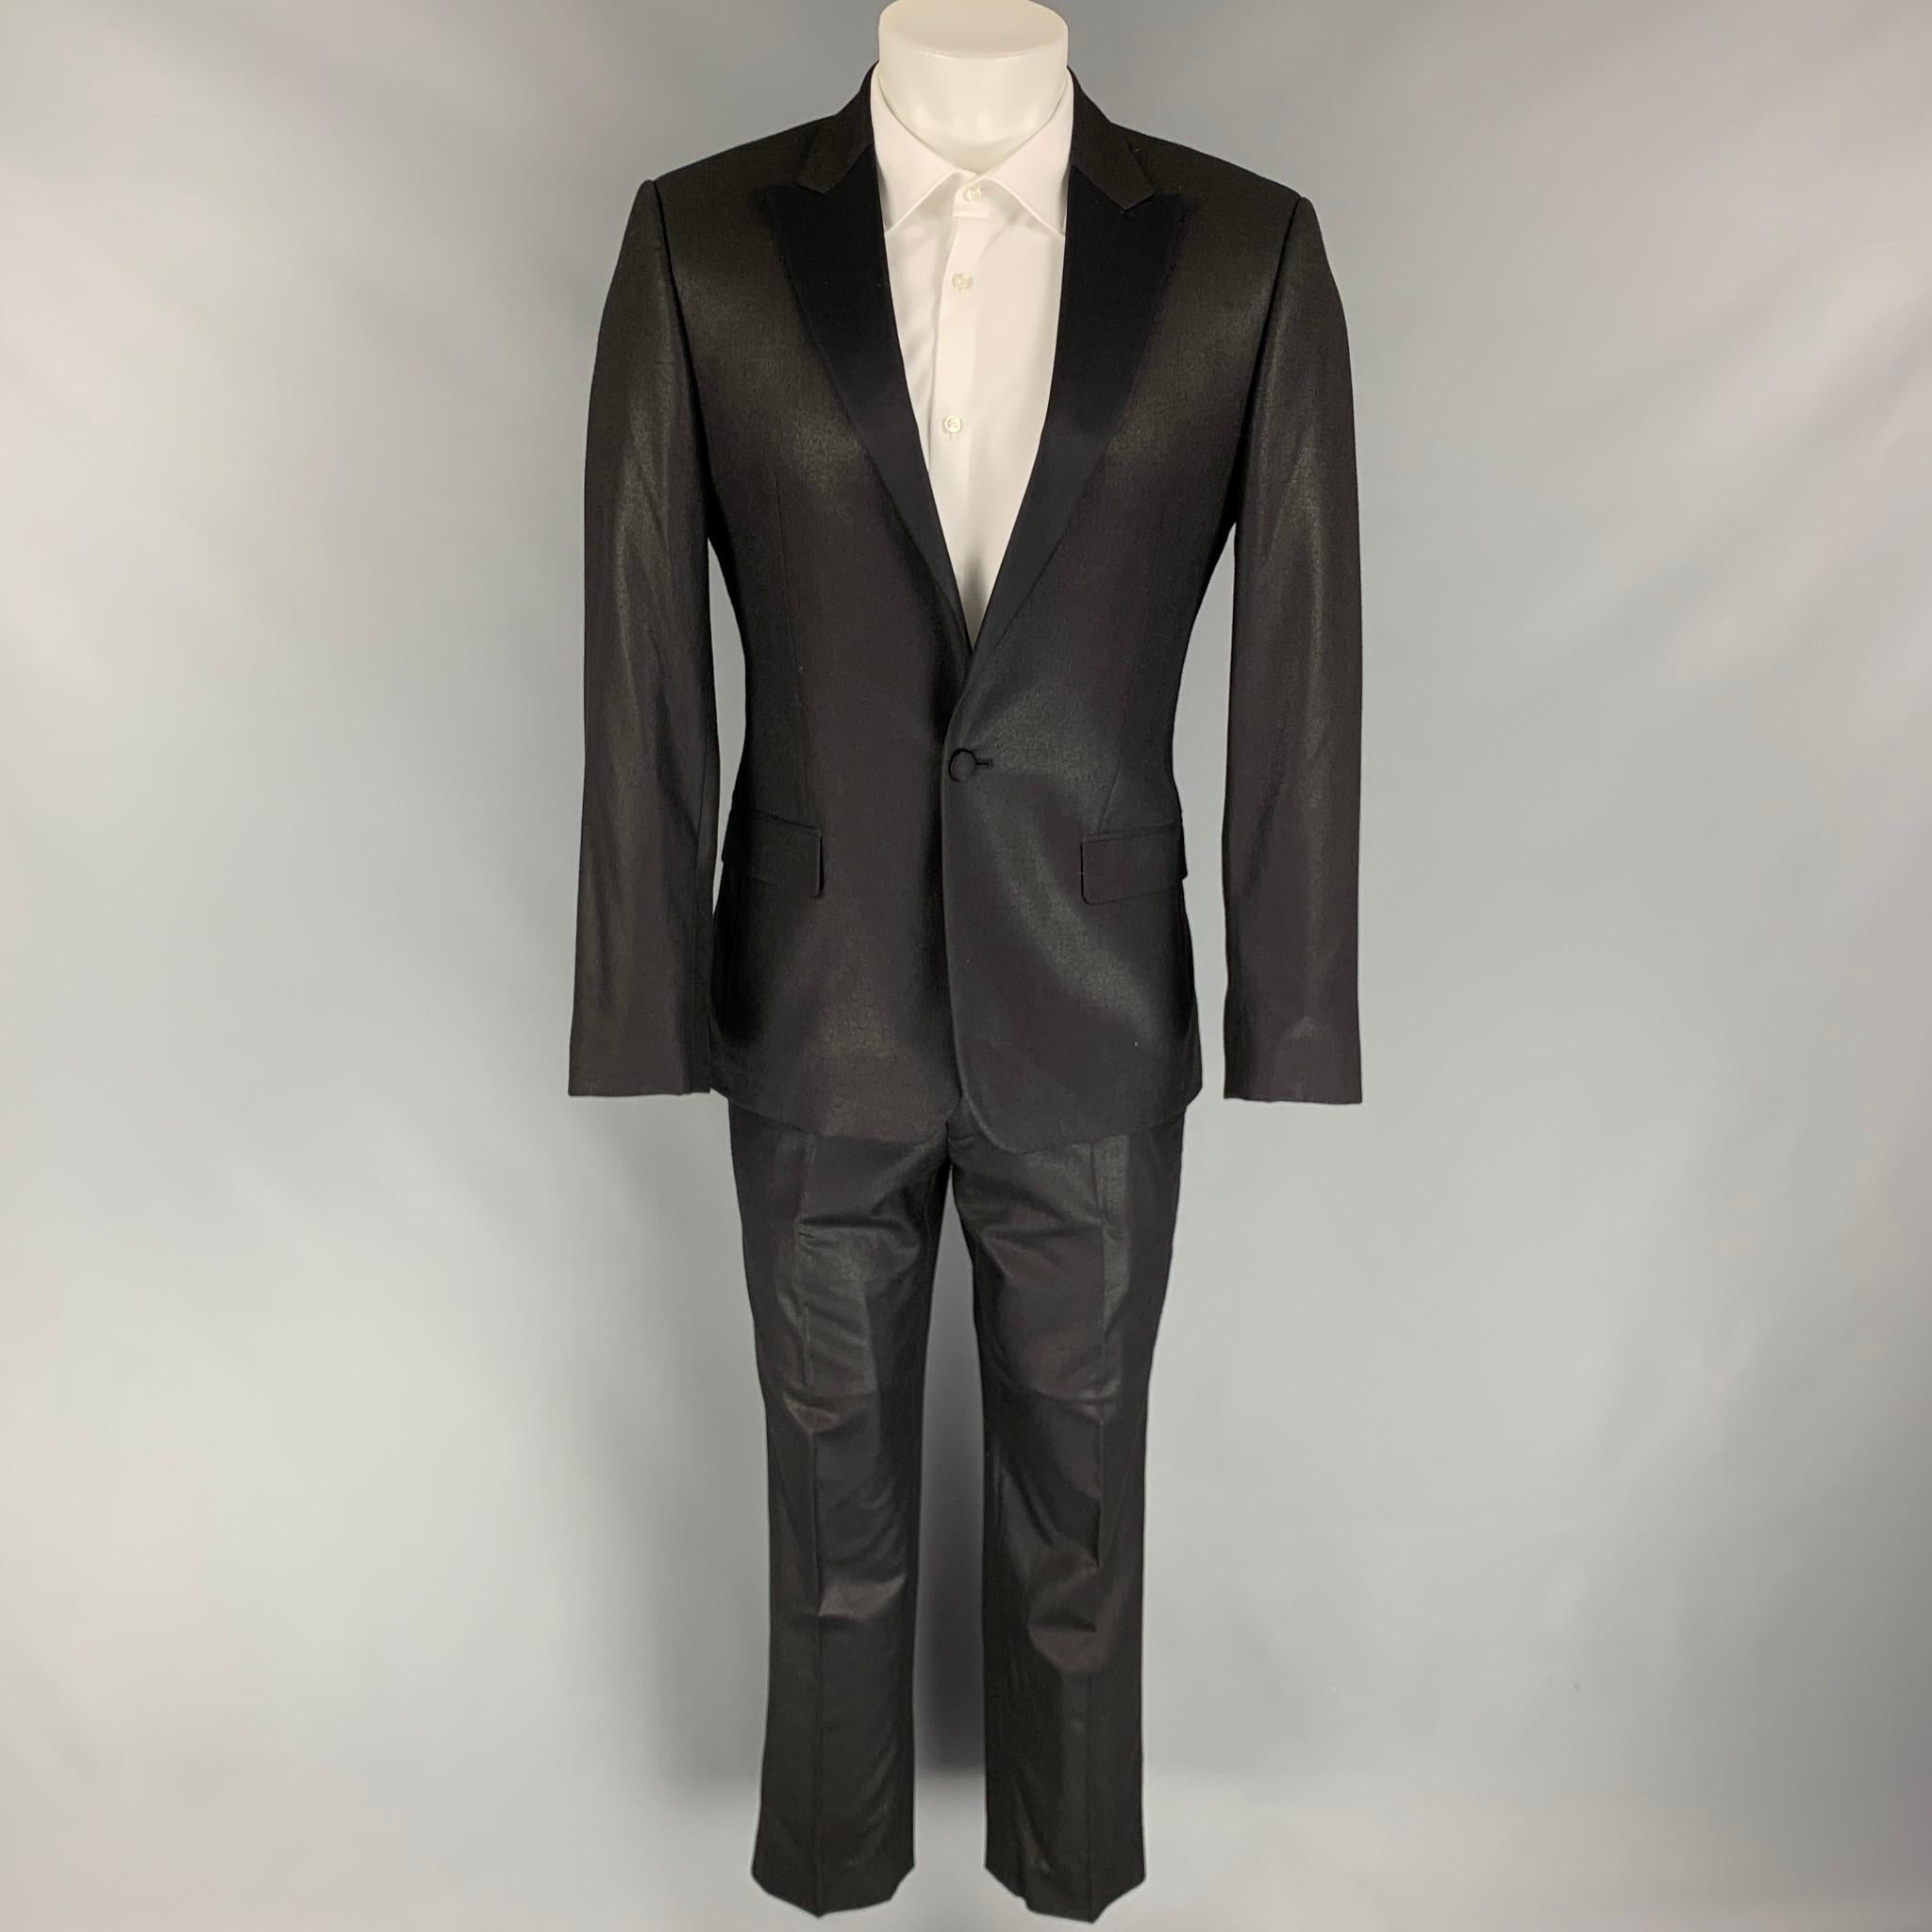 CALVIN KLEIN COLLECTION tuxedo suit comes in a black sparkle wool with a full liner and includes a single breasted, single button sport coat with a peak lapel and matching flat front trousers.

New With Tags.
Marked: